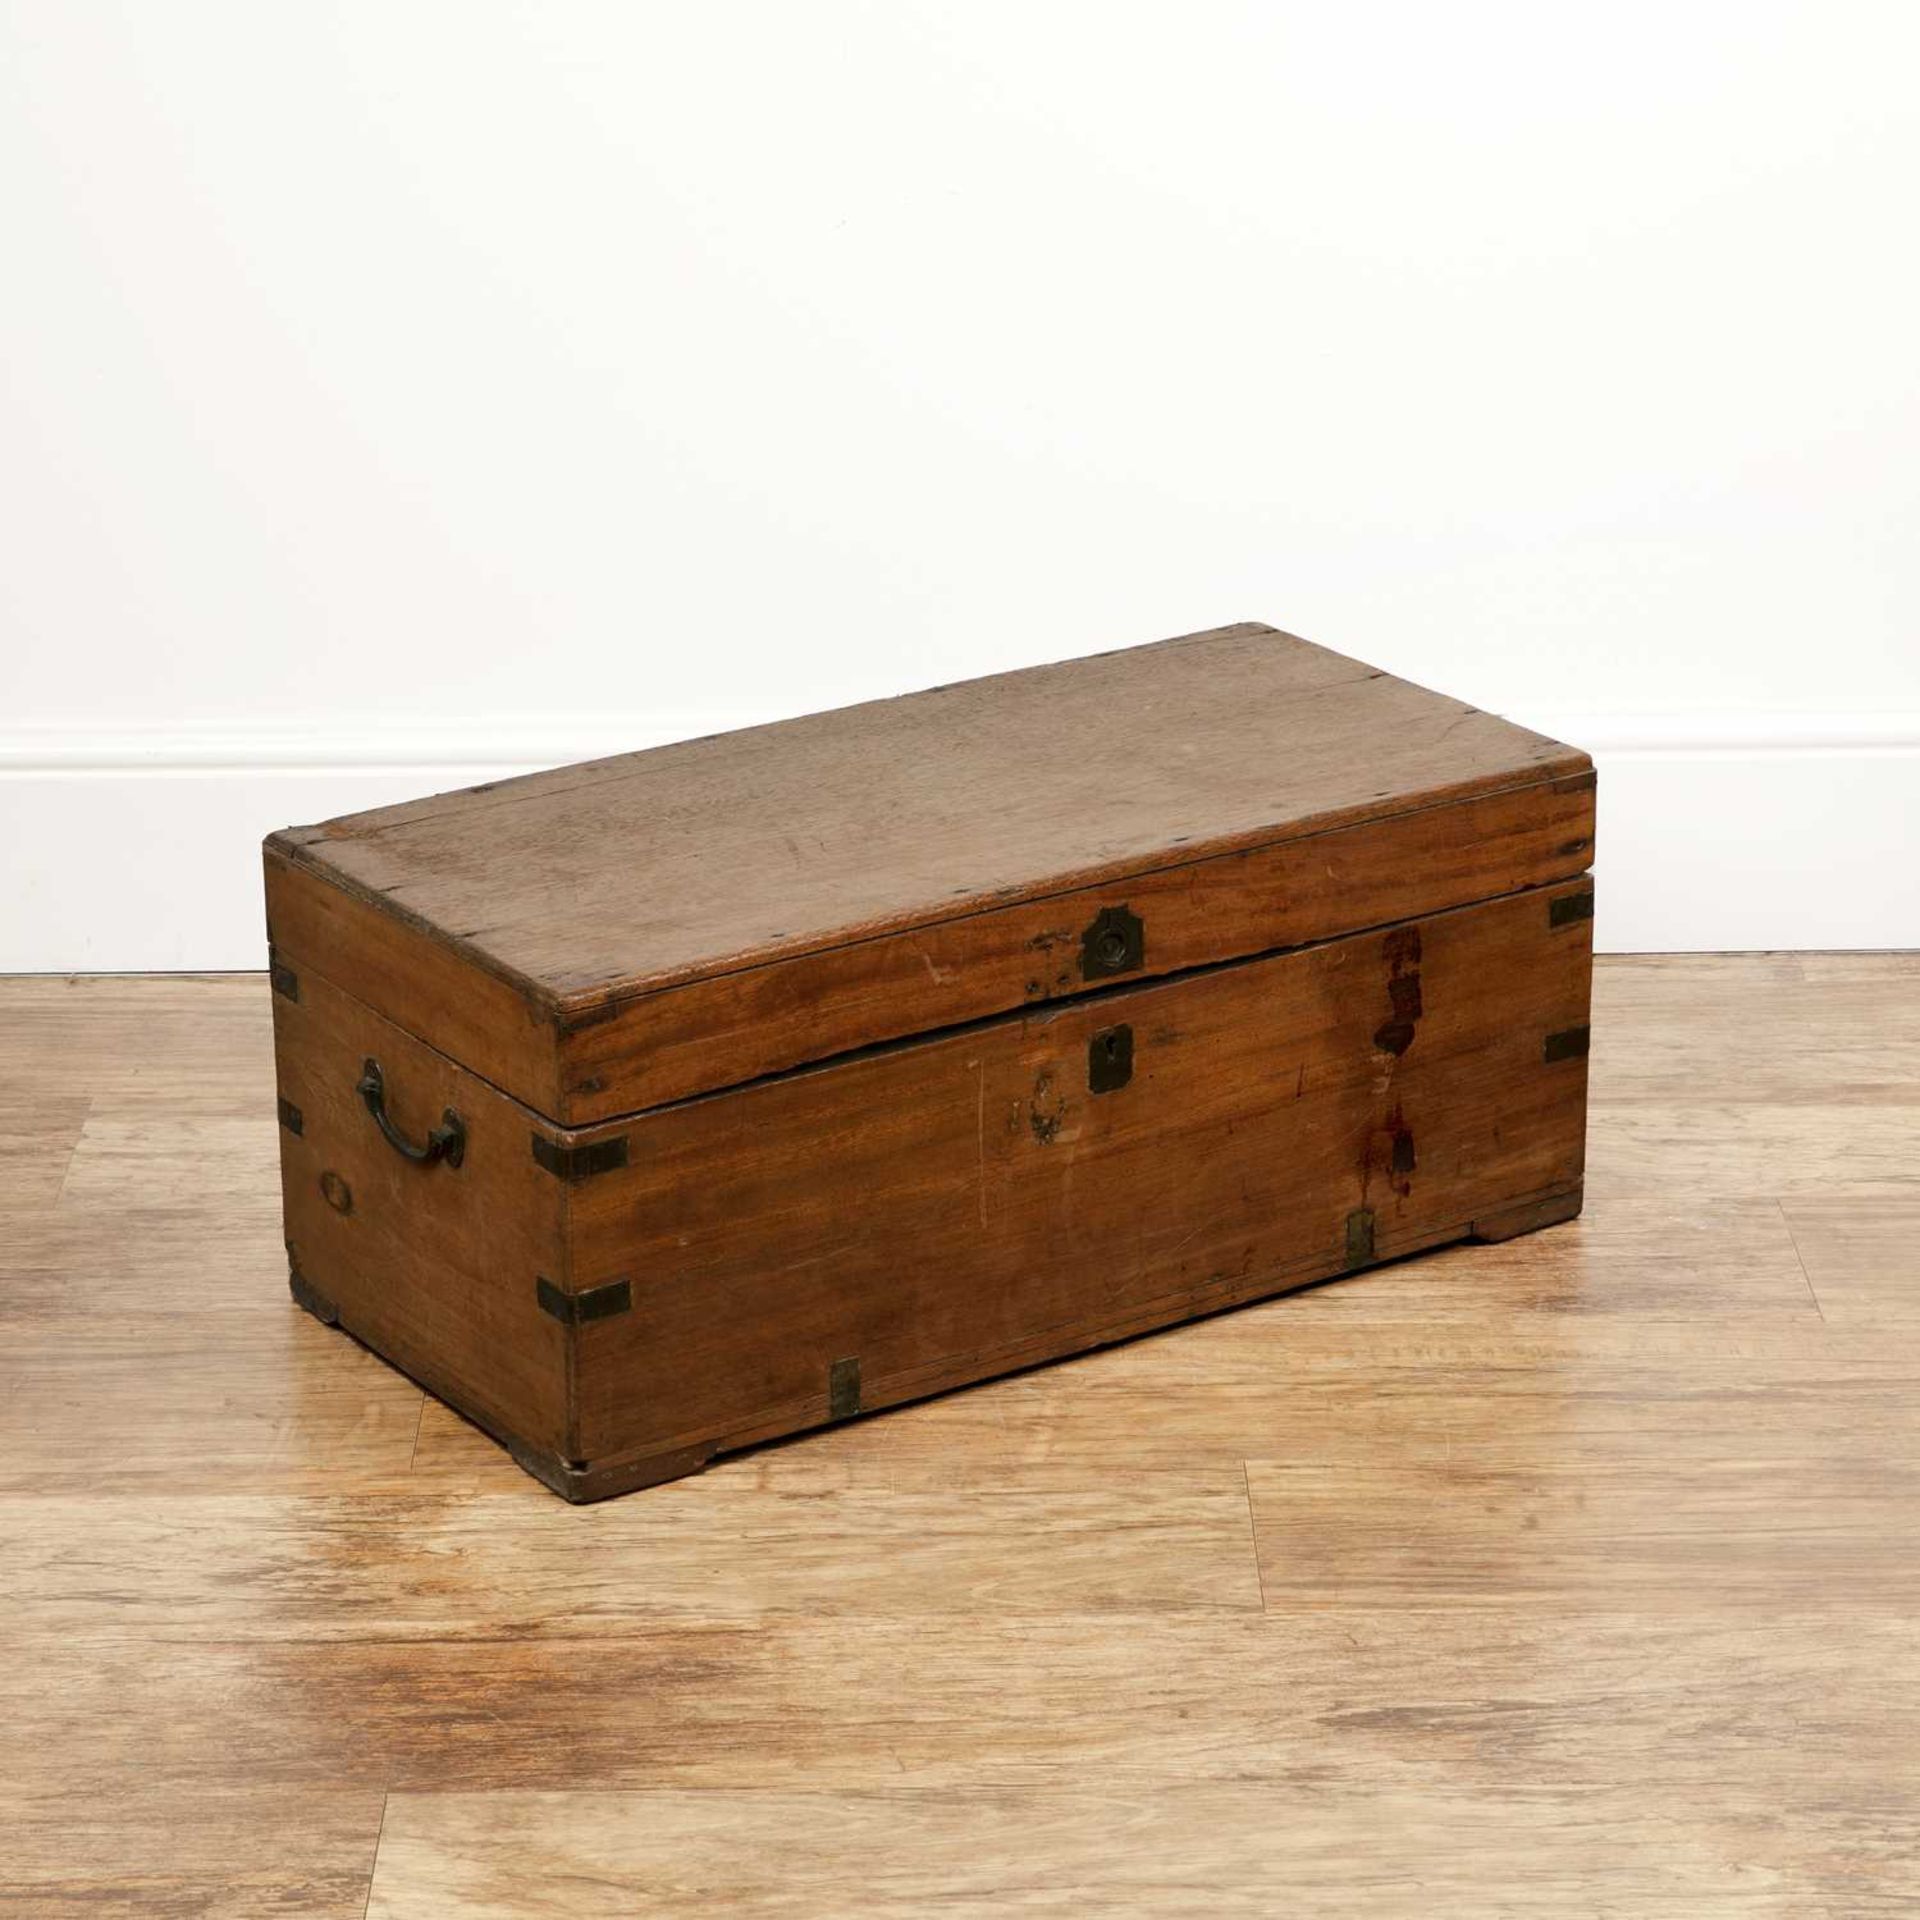 Small campaign teak trunk 19th Century, with brass handle and mounts, 70cm wide, 34cm deep, 29.5cm